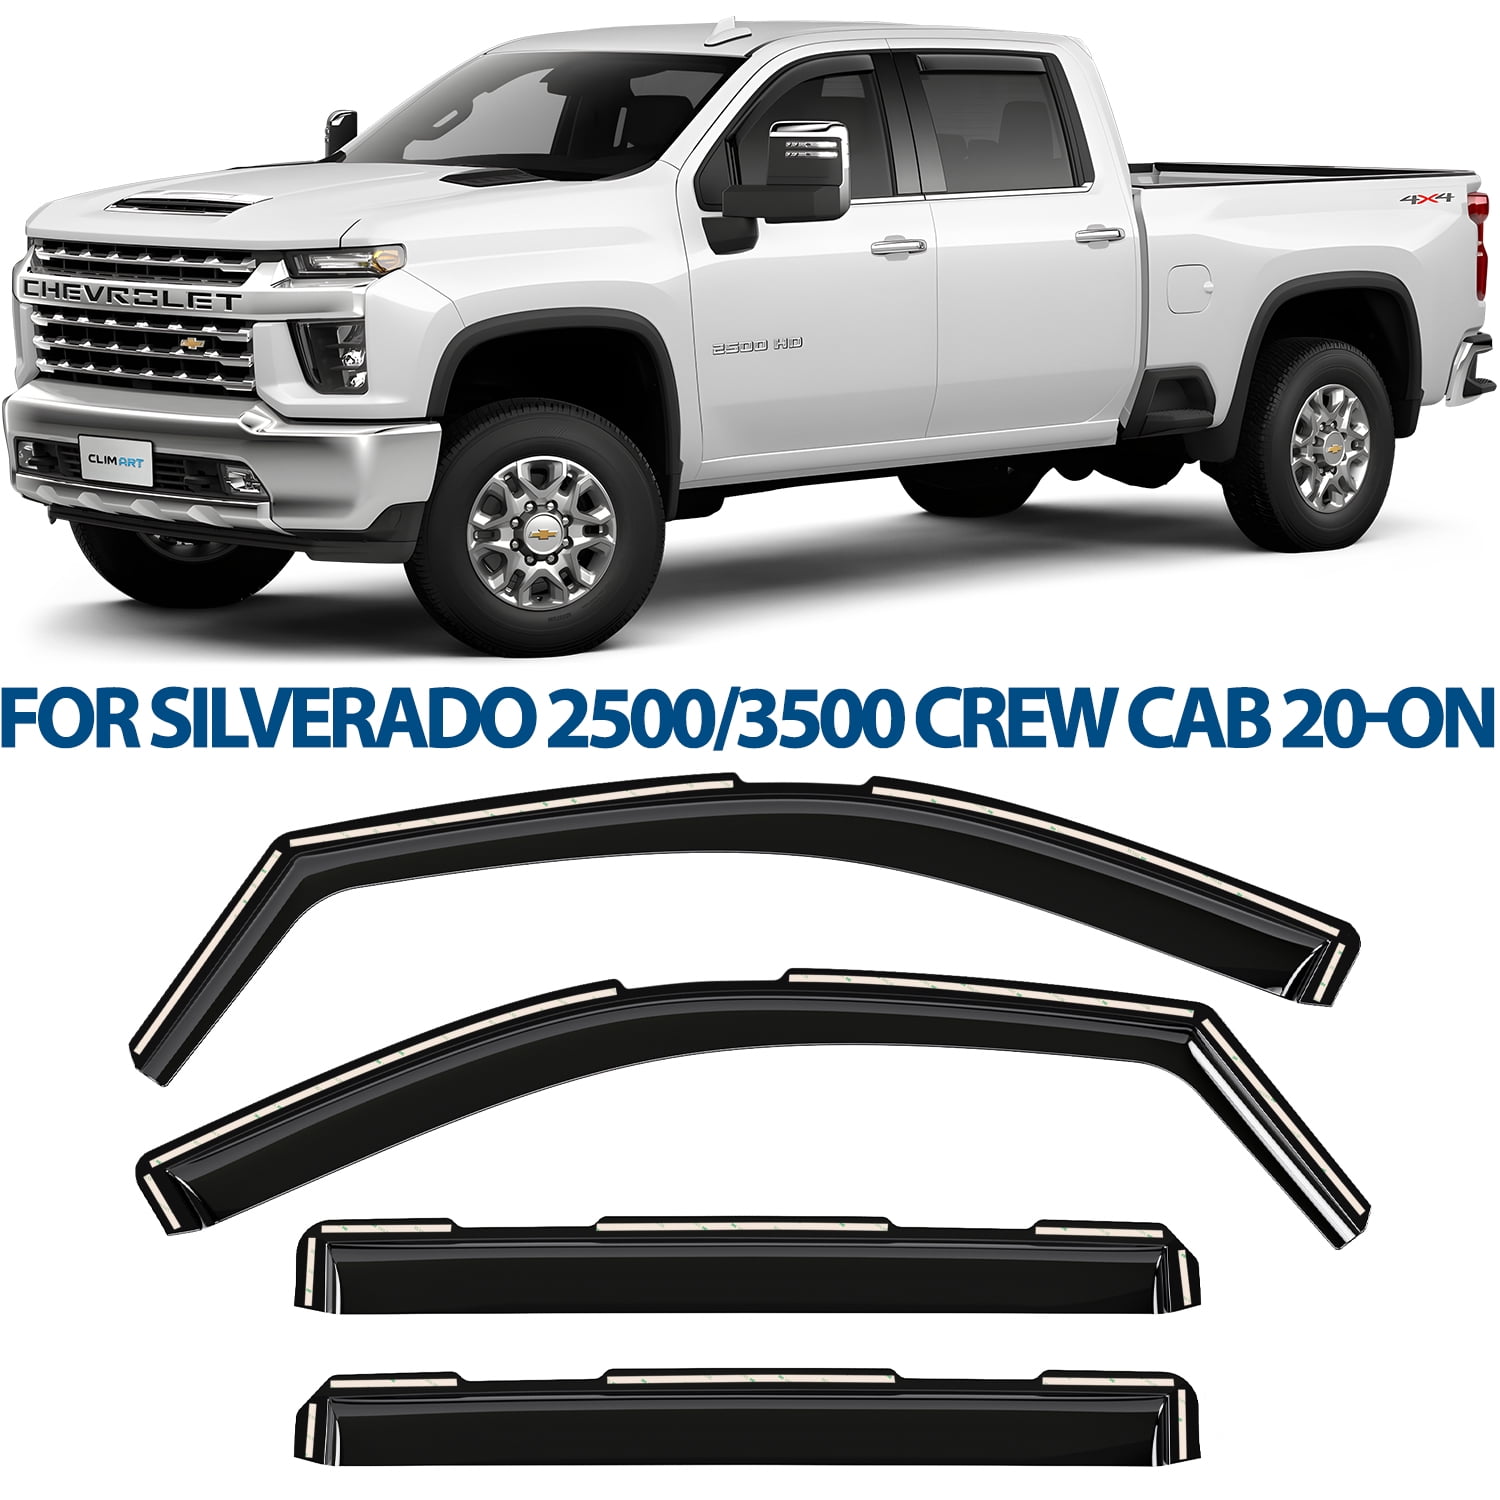 CLIM ART in-Channel Incredibly Durable Rain Guards for Chevy